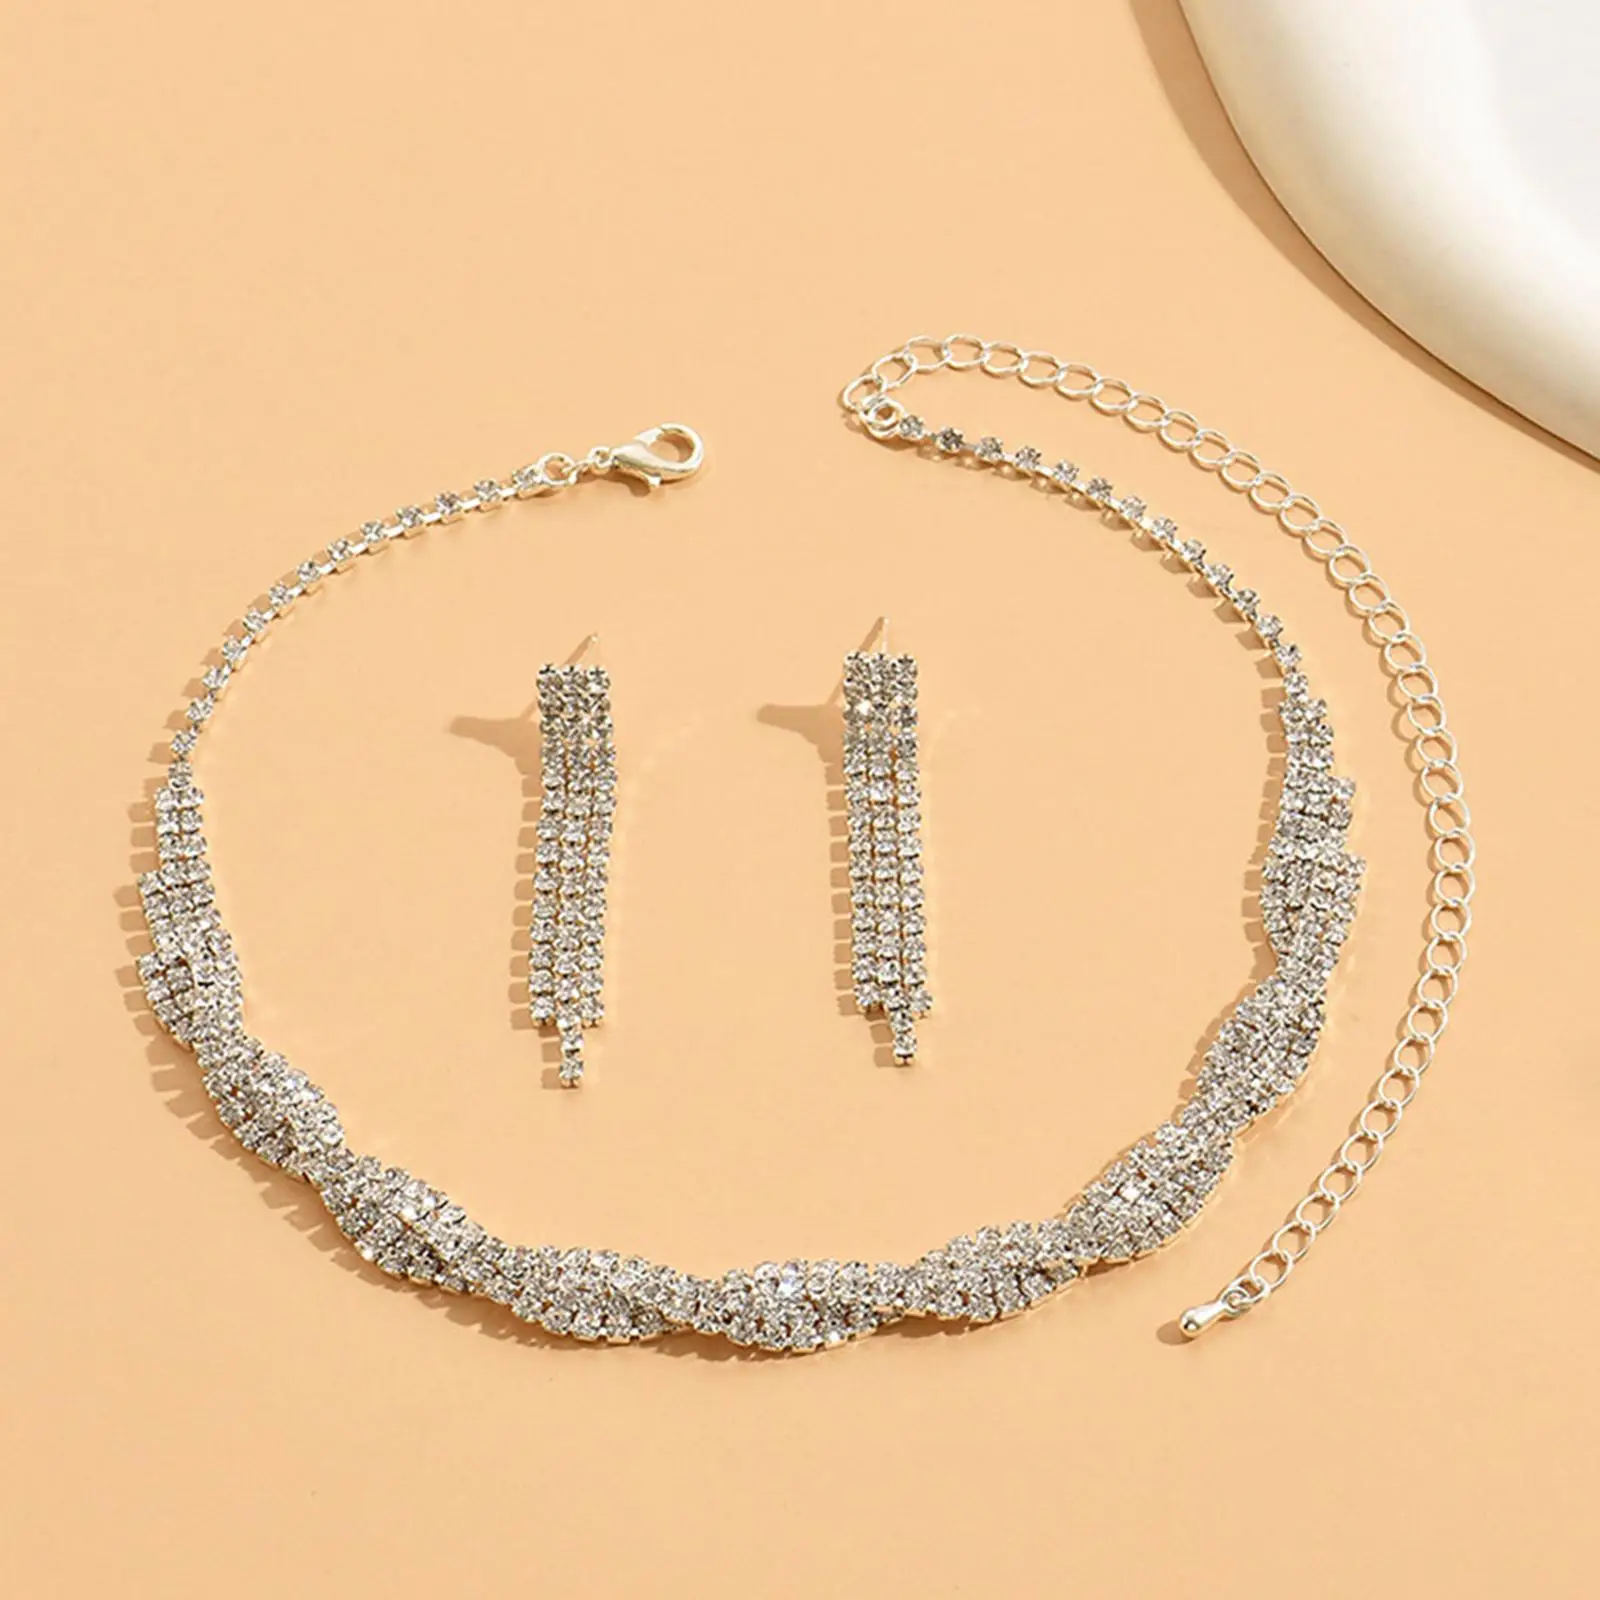 Fashion Wedding Jewelry for Bride Women Bridesmaid Rhinestone Necklace Earrings for Dinner Party Prom Dating Wedding Anniversary